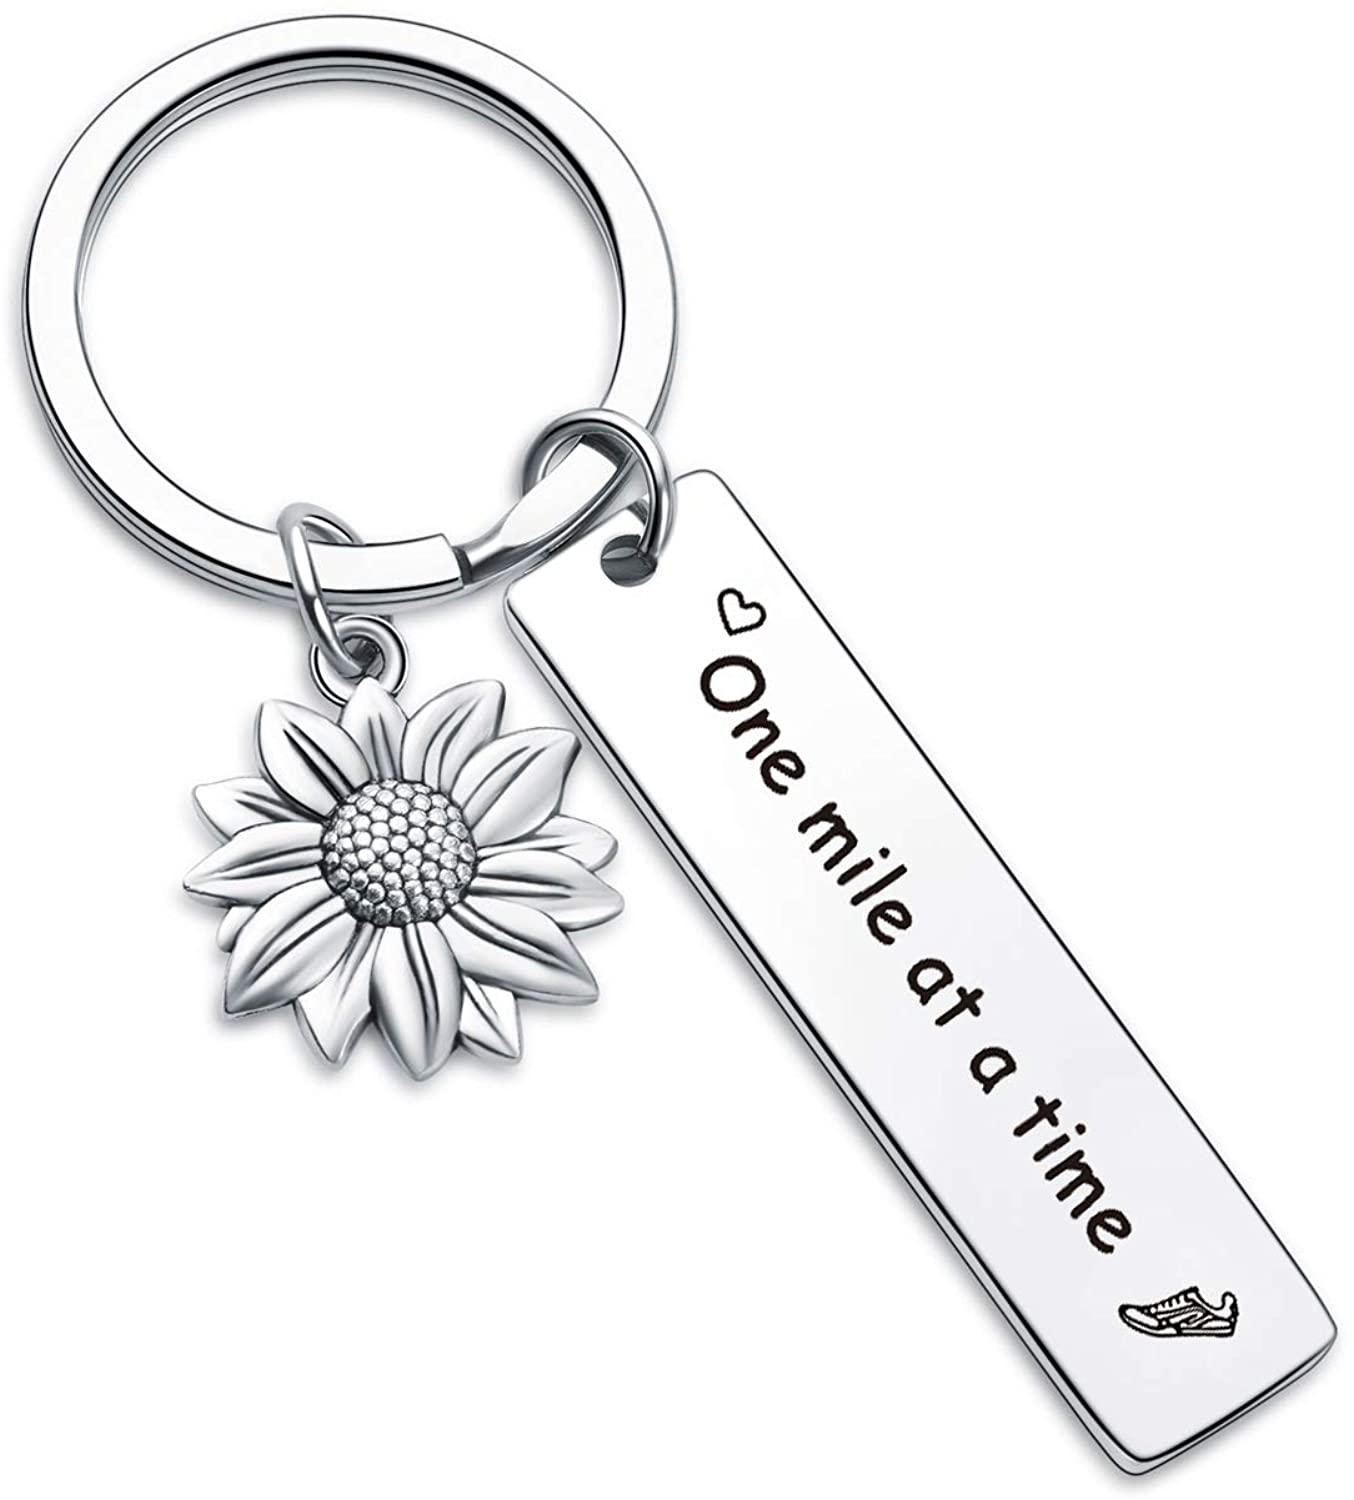 Runner Friend Keyring Cross Country Keychain Marathon Runners Gifts One Mile at A Time Jewelry